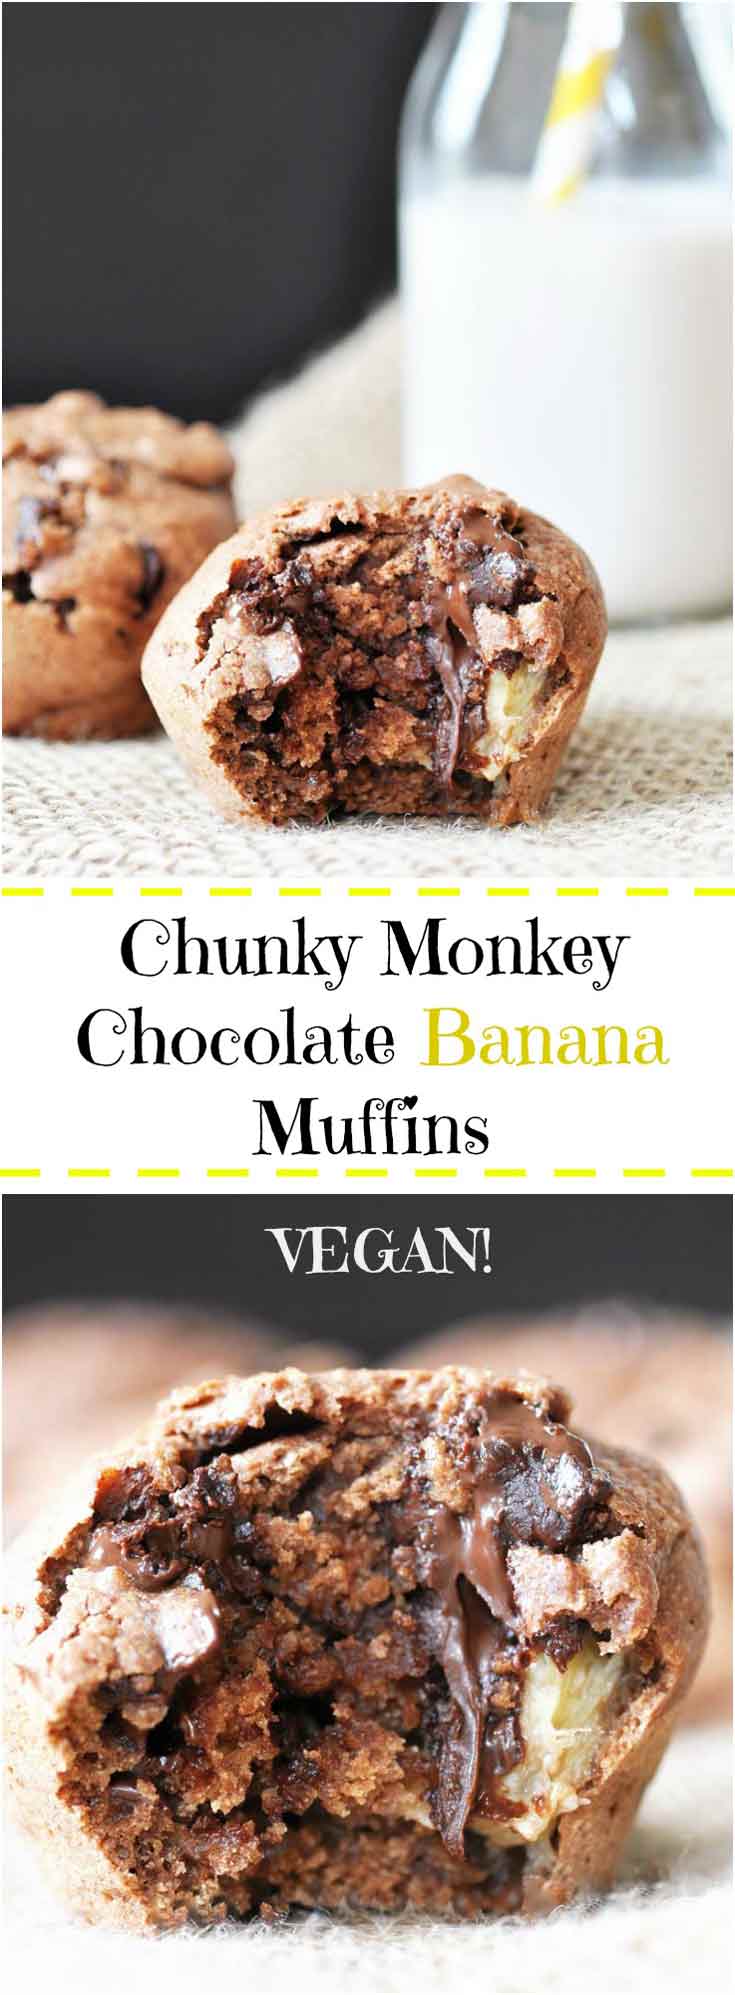 Chunky Monkey Chocolate Banana Muffins! This vegan muffin recipe is filled with chocolate and bananas. The perfect morning or afternoon treat. www.veganosity.com